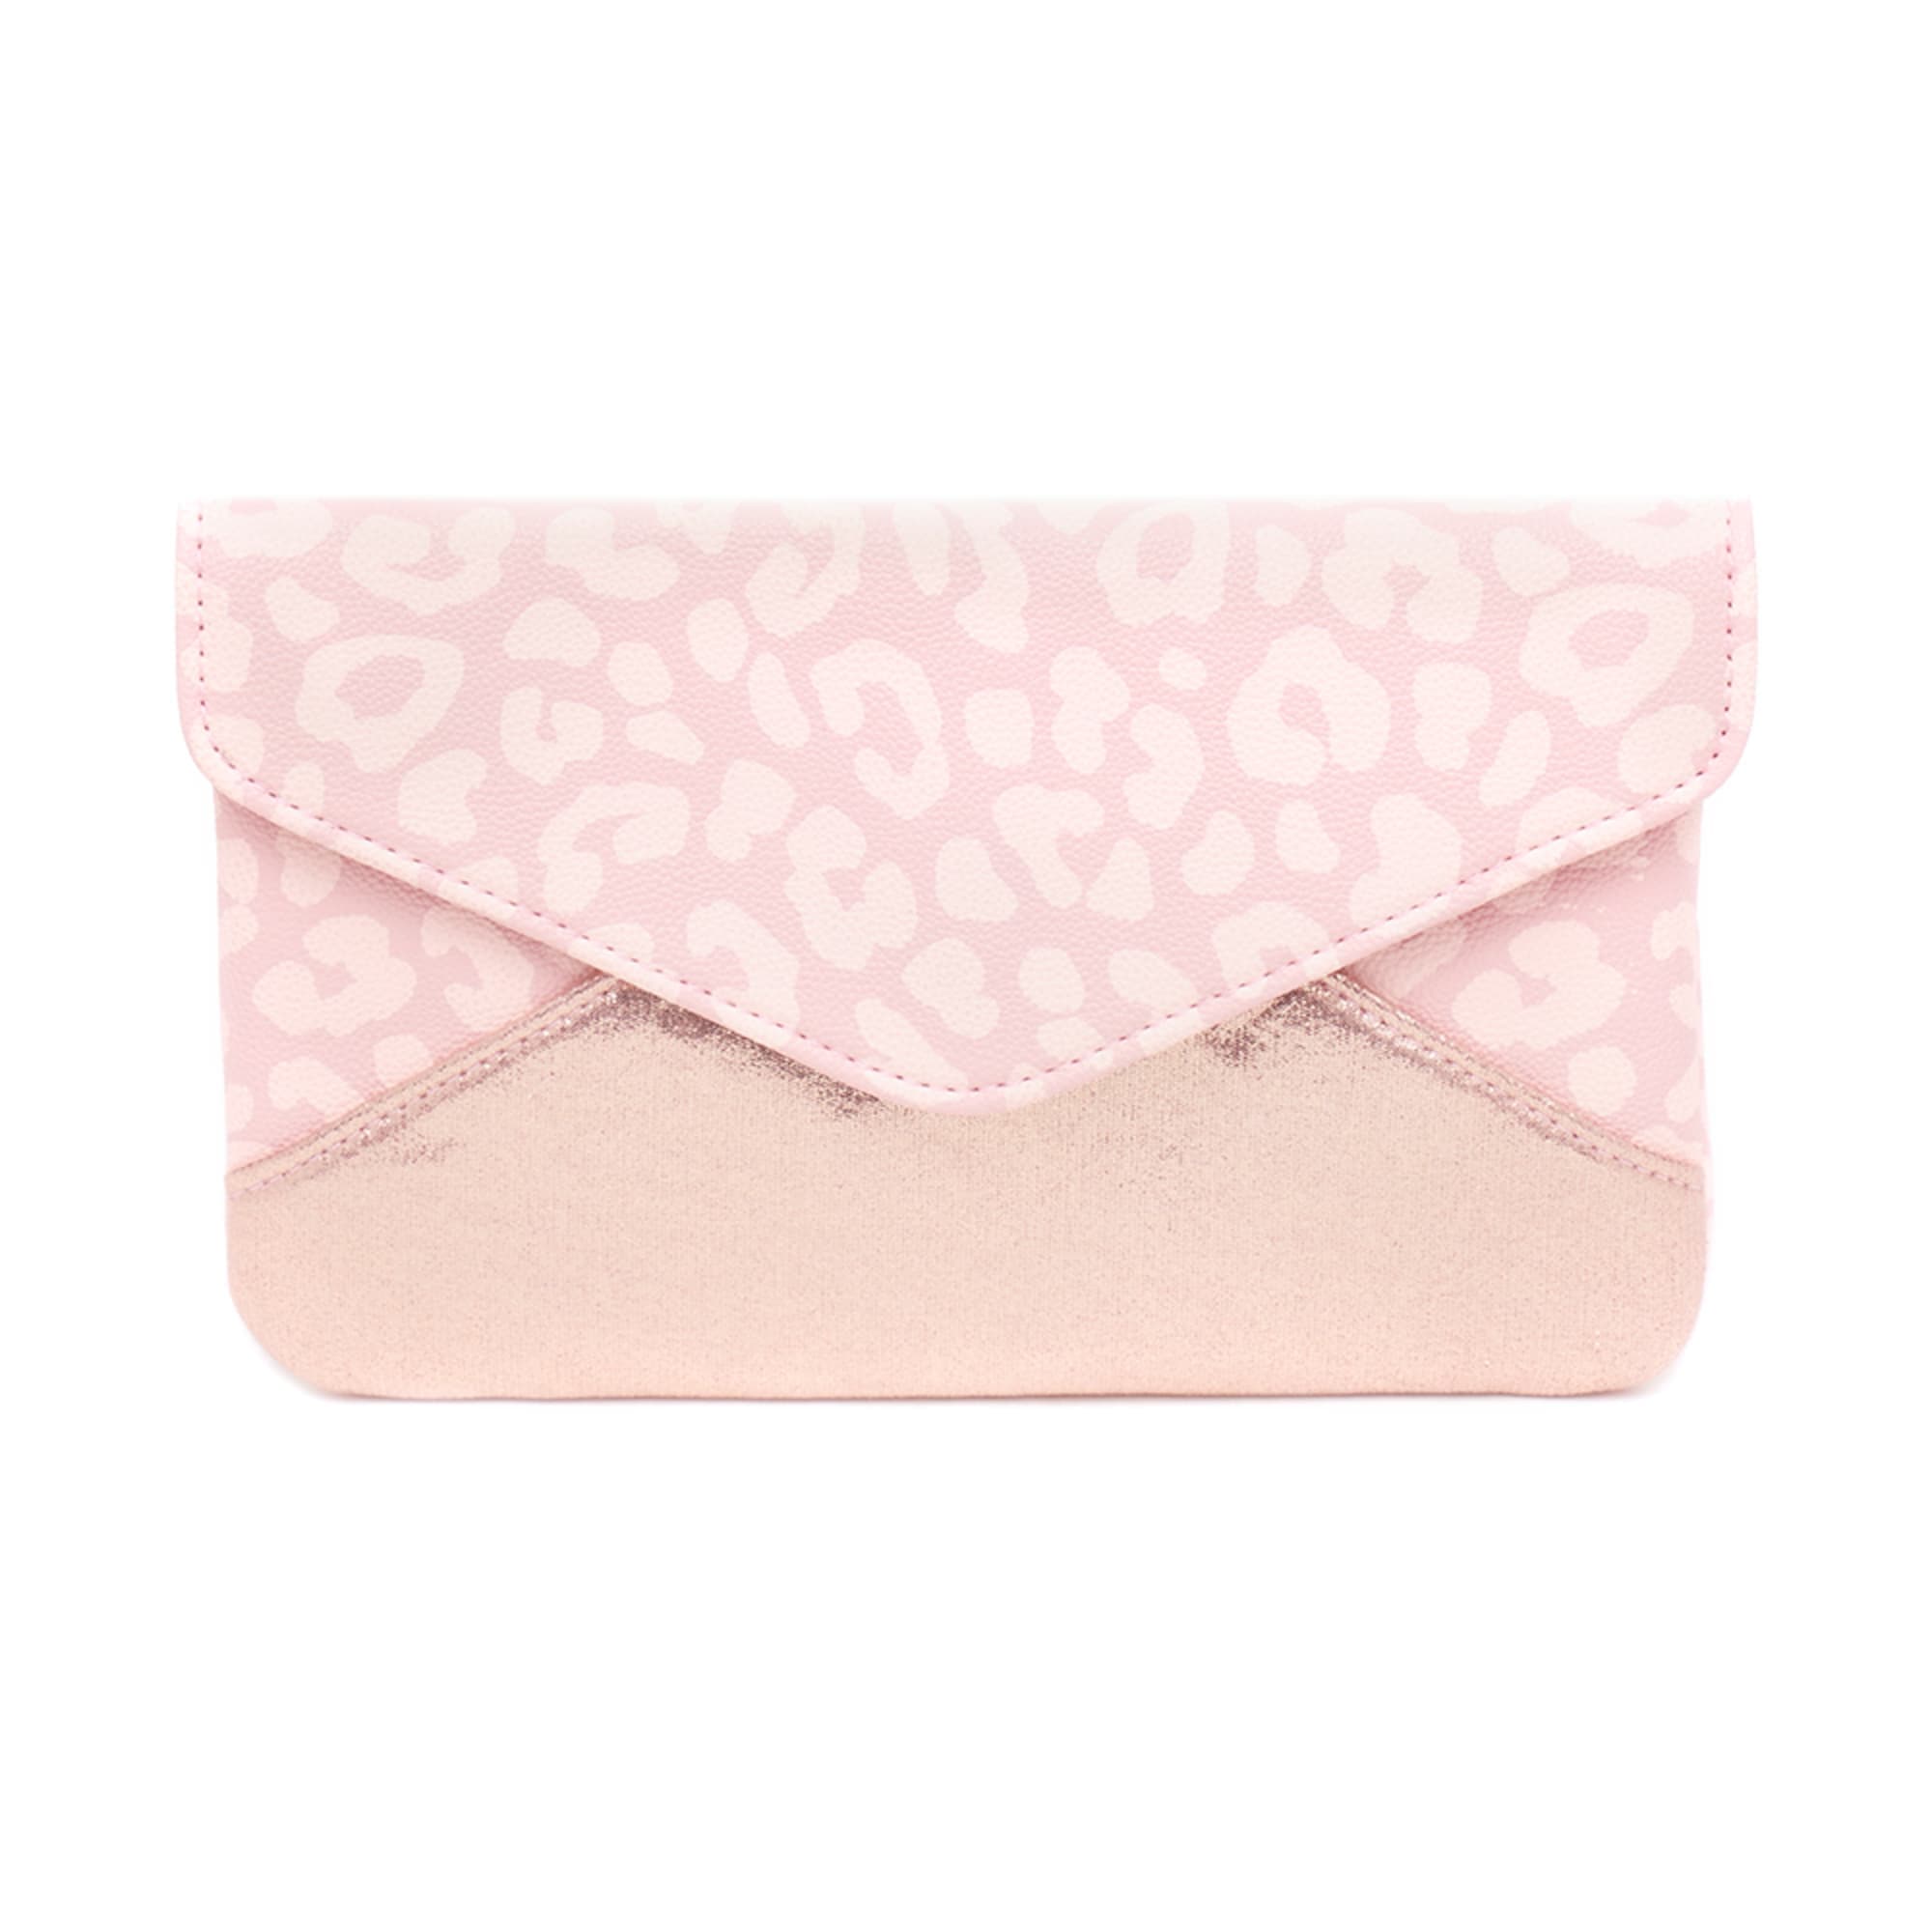 Home Basics Leopard Cosmetic Envelope Clutch, Pink $5.00 EACH, CASE PACK OF 12